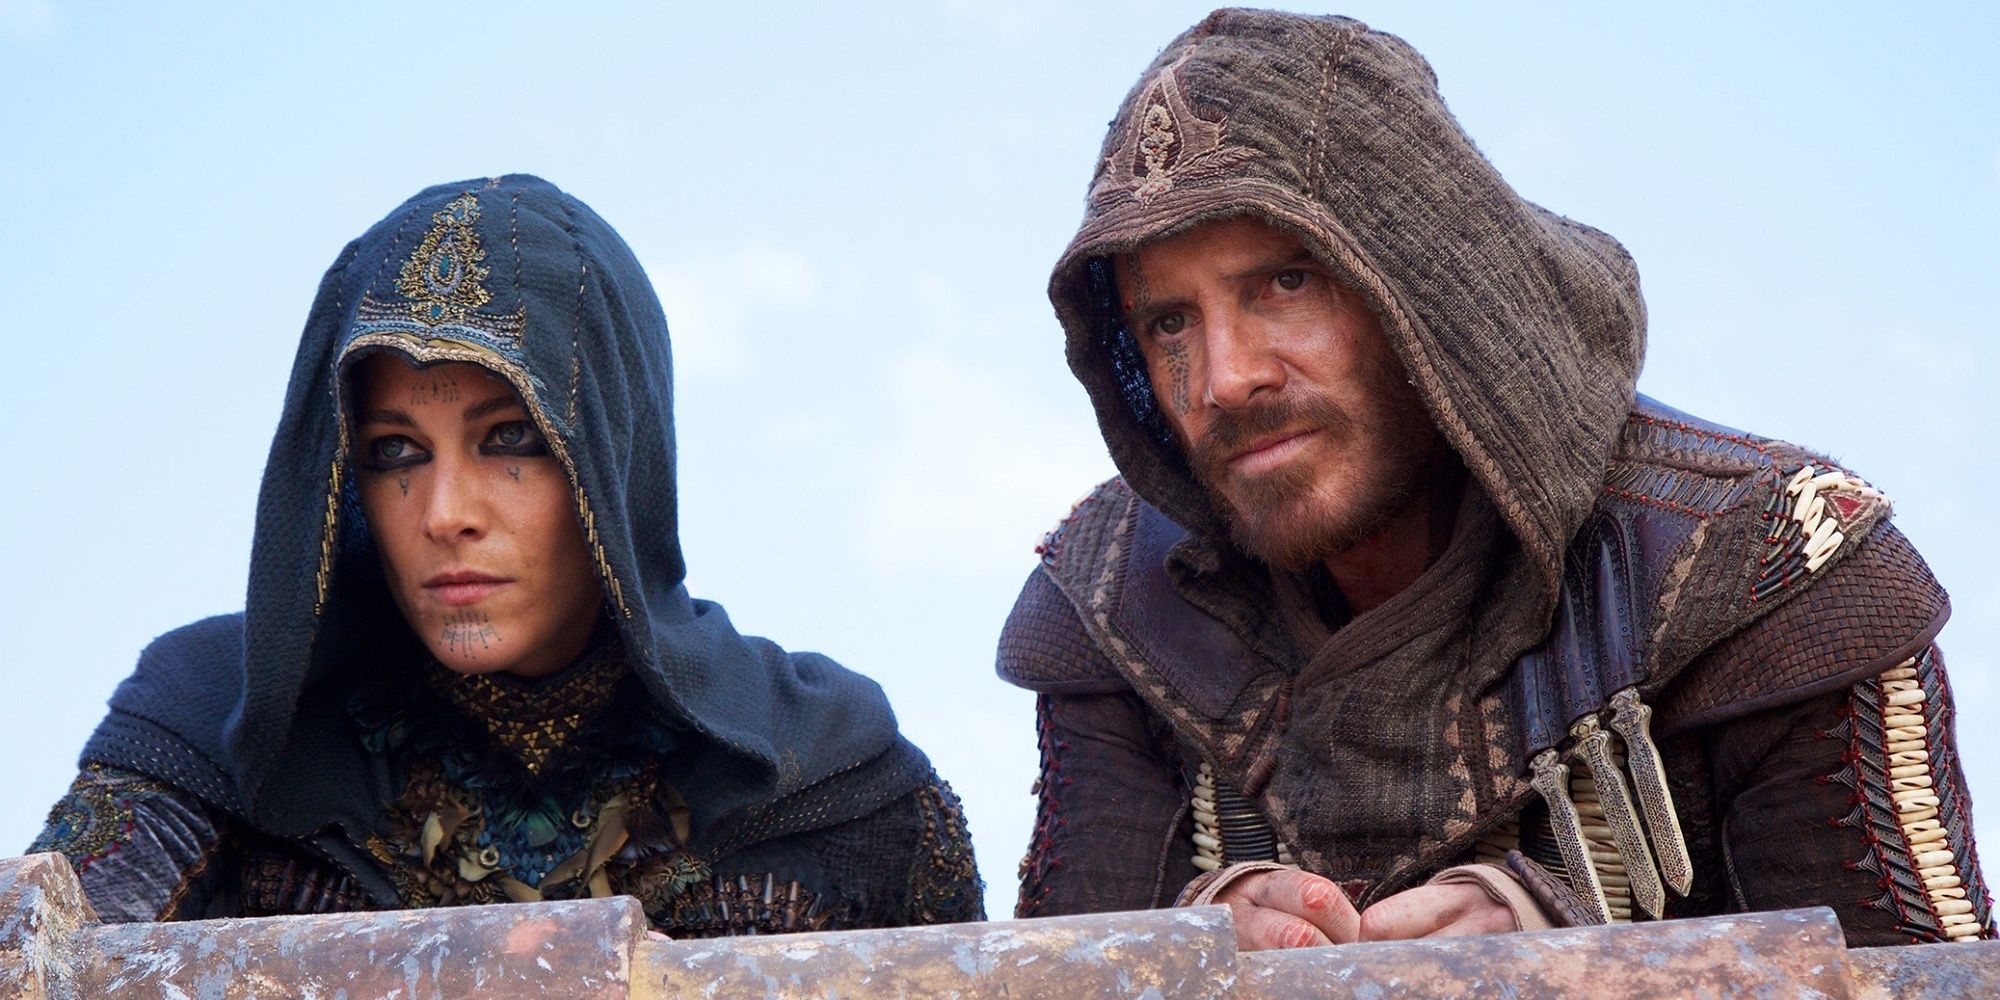 Michael Fassbender in 15th century costume in Assassin's Creed. 